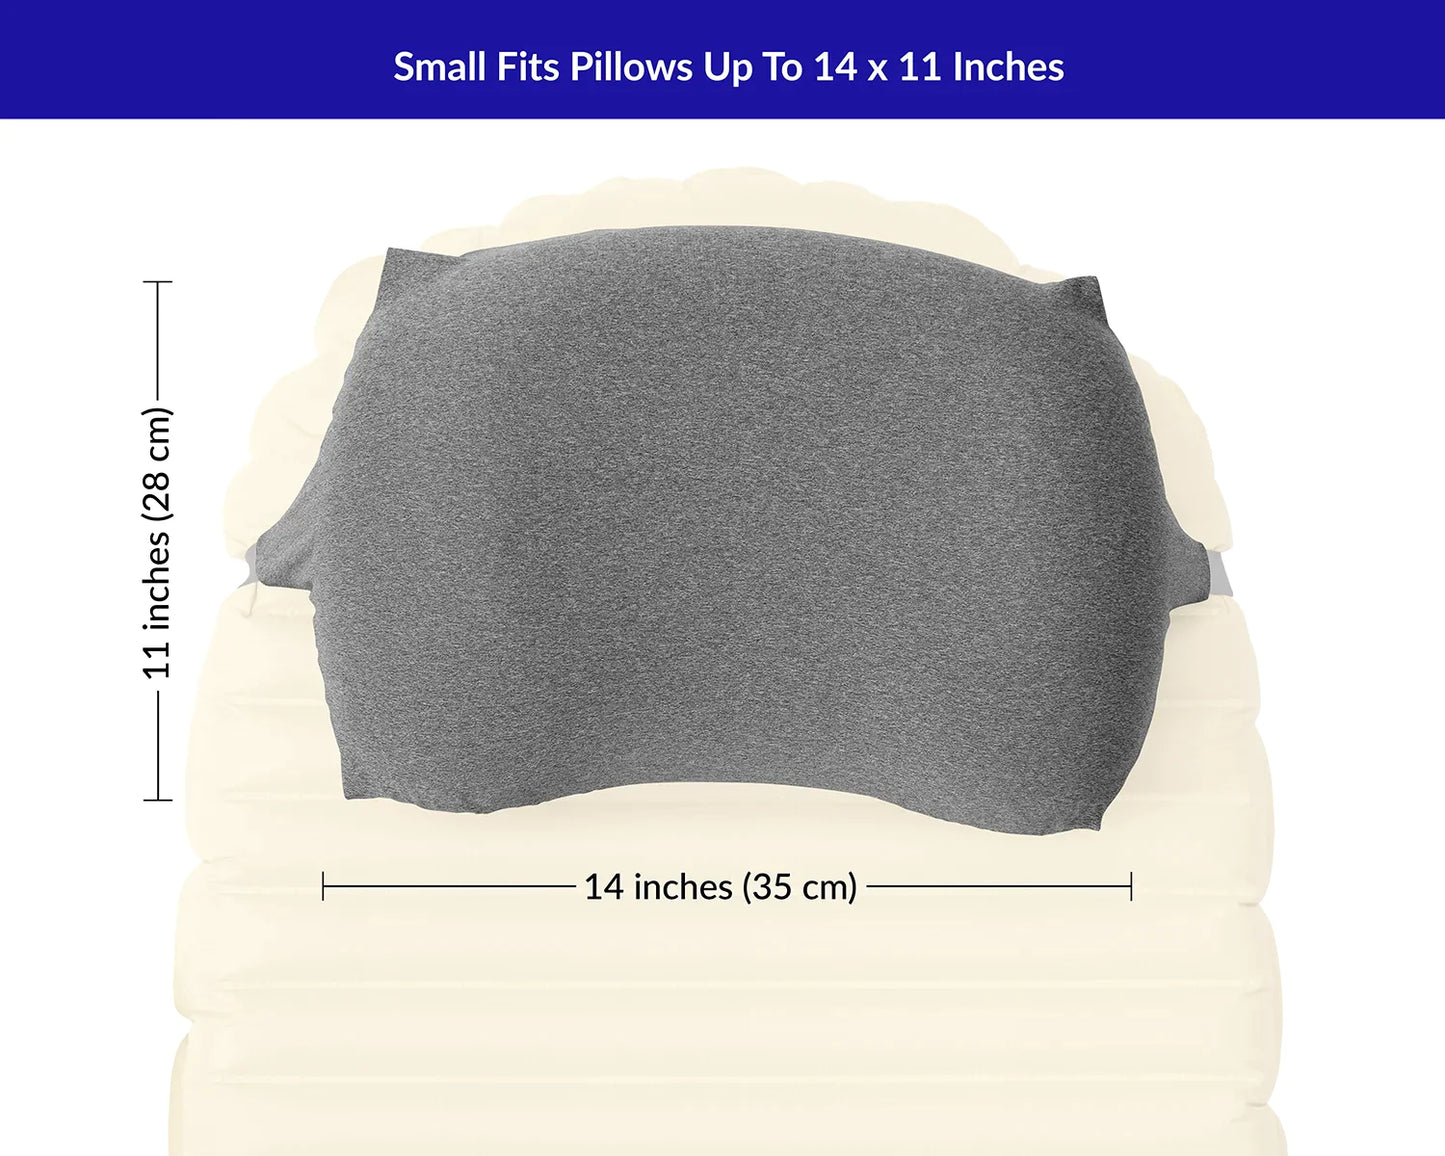 mall size measurements graphic. Fits up to a 14x11 inch inflatable camping pillow.